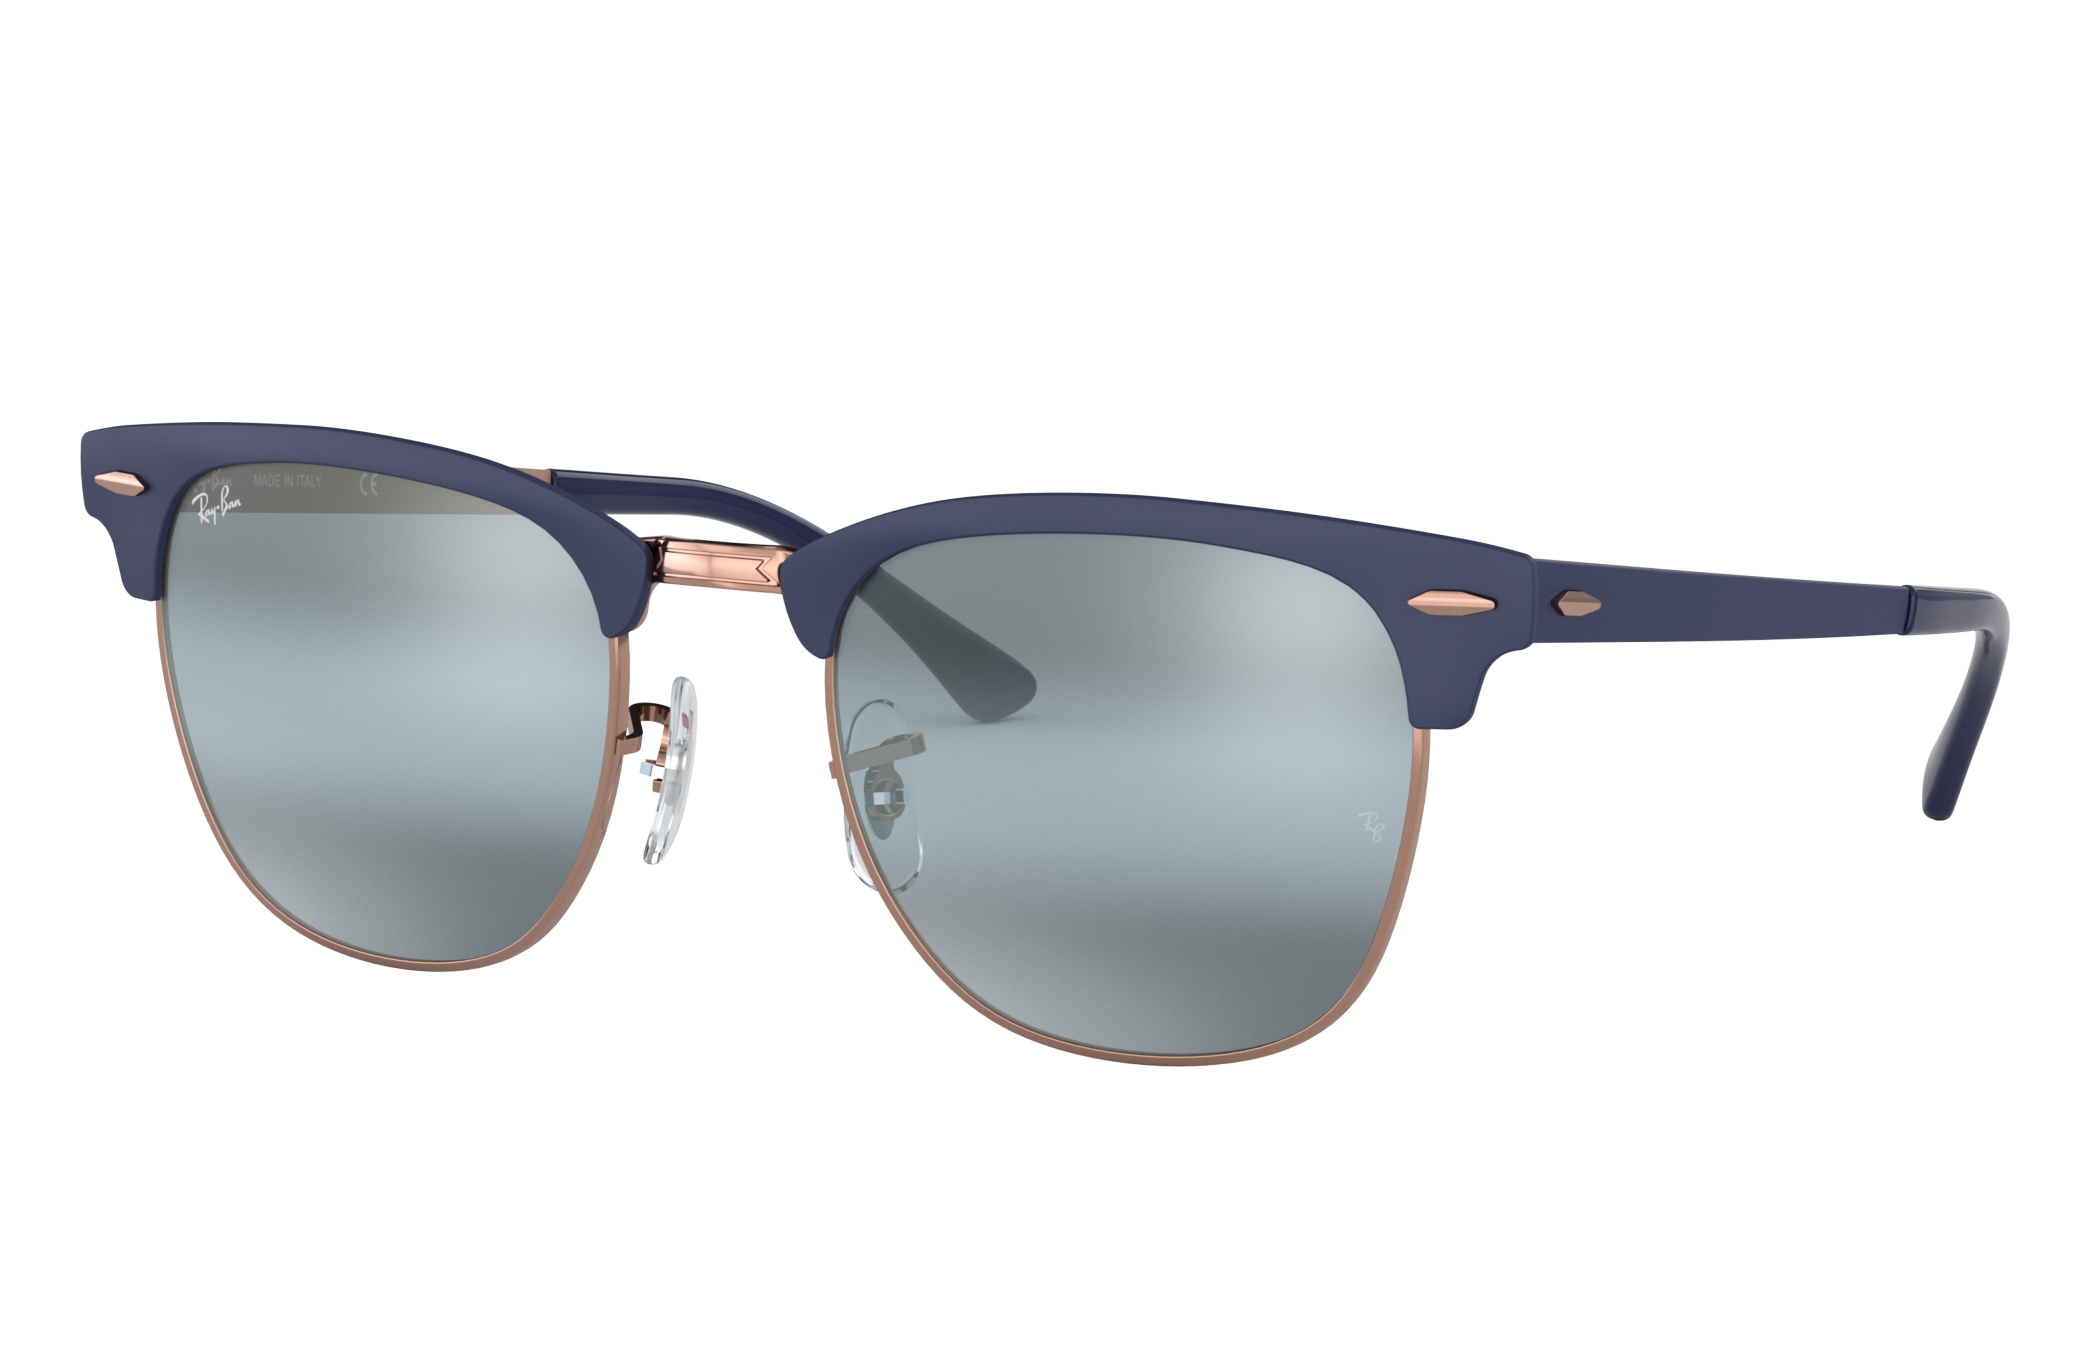 Everything You Need To Know Before You Buy Ray-Ban Sunglasses | lupon ...